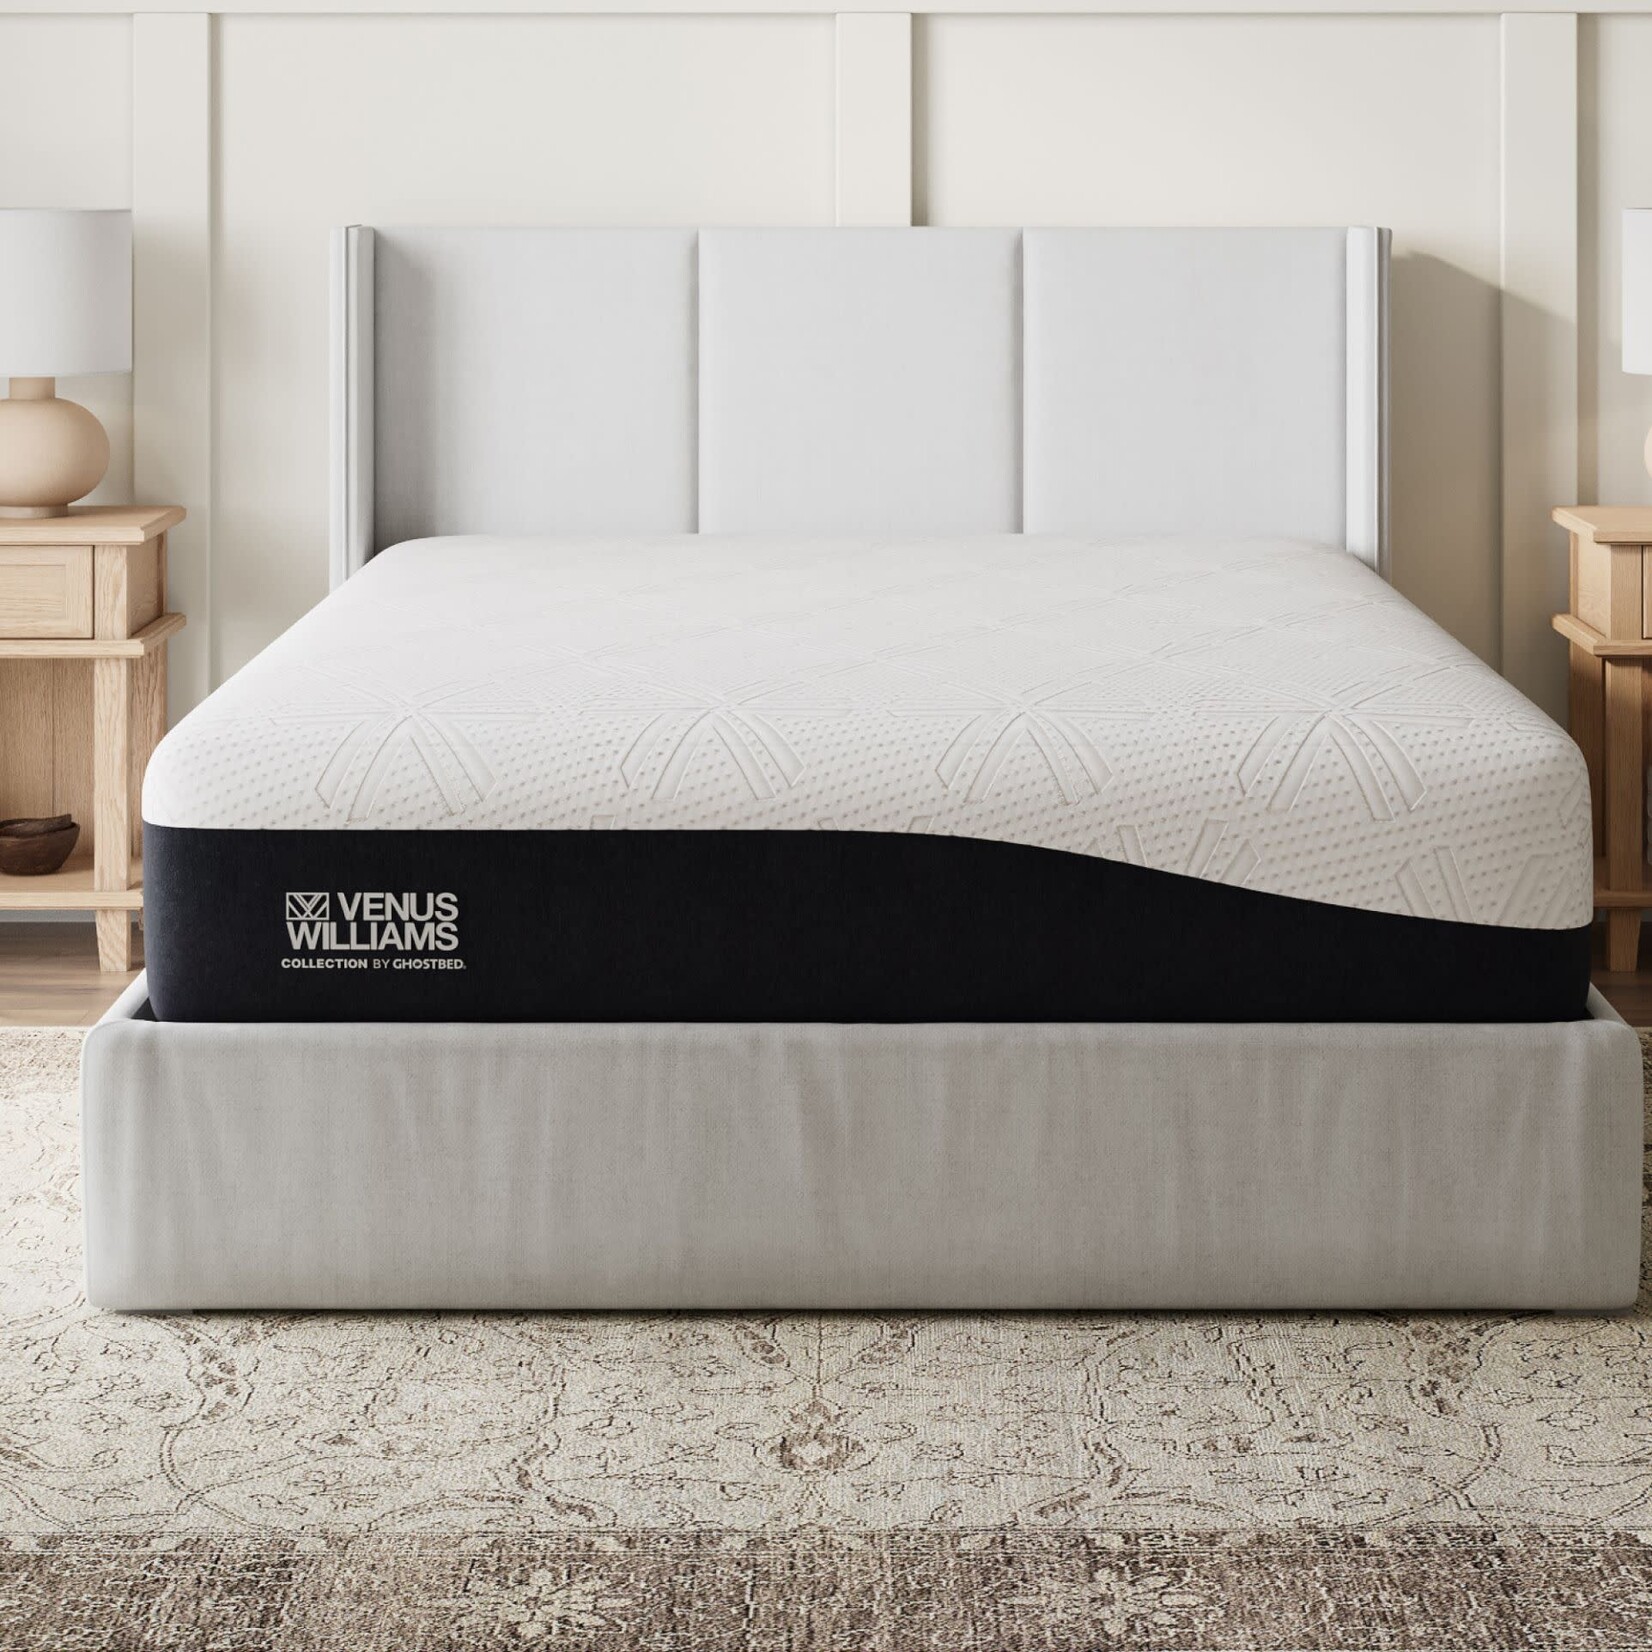 GHOSTBED VENUS WILLIAMS COLLECTION BY GHOSTBED - THE ACE 14"